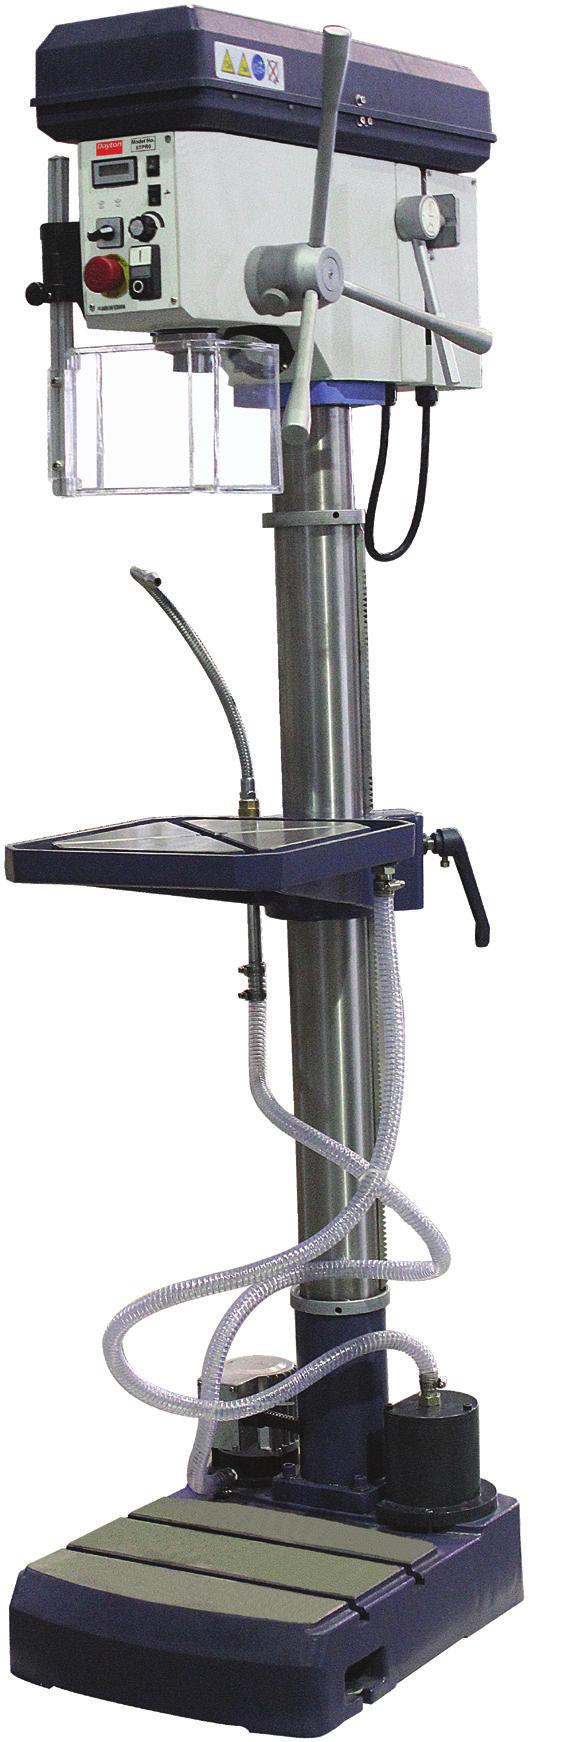 16" VARIABLE SPEED DRILL PRESS Dayton's highest quality drilling machine is built using the latest drilling technology and operational features that stand up to production output and accuracy.